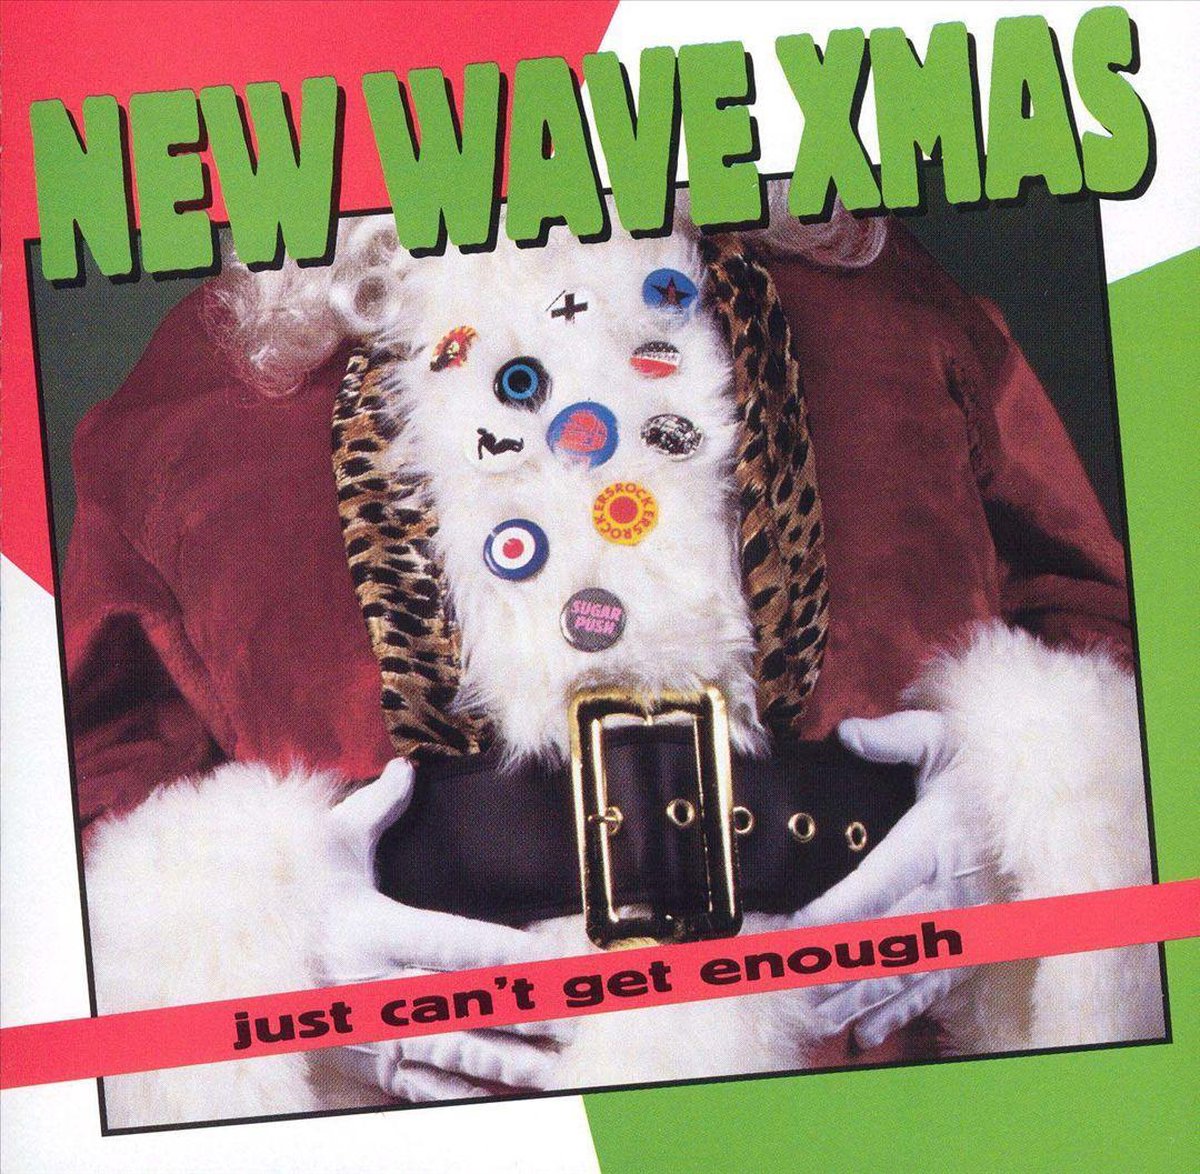 Just Can't Get Enough: New Wave Christmas - various artists